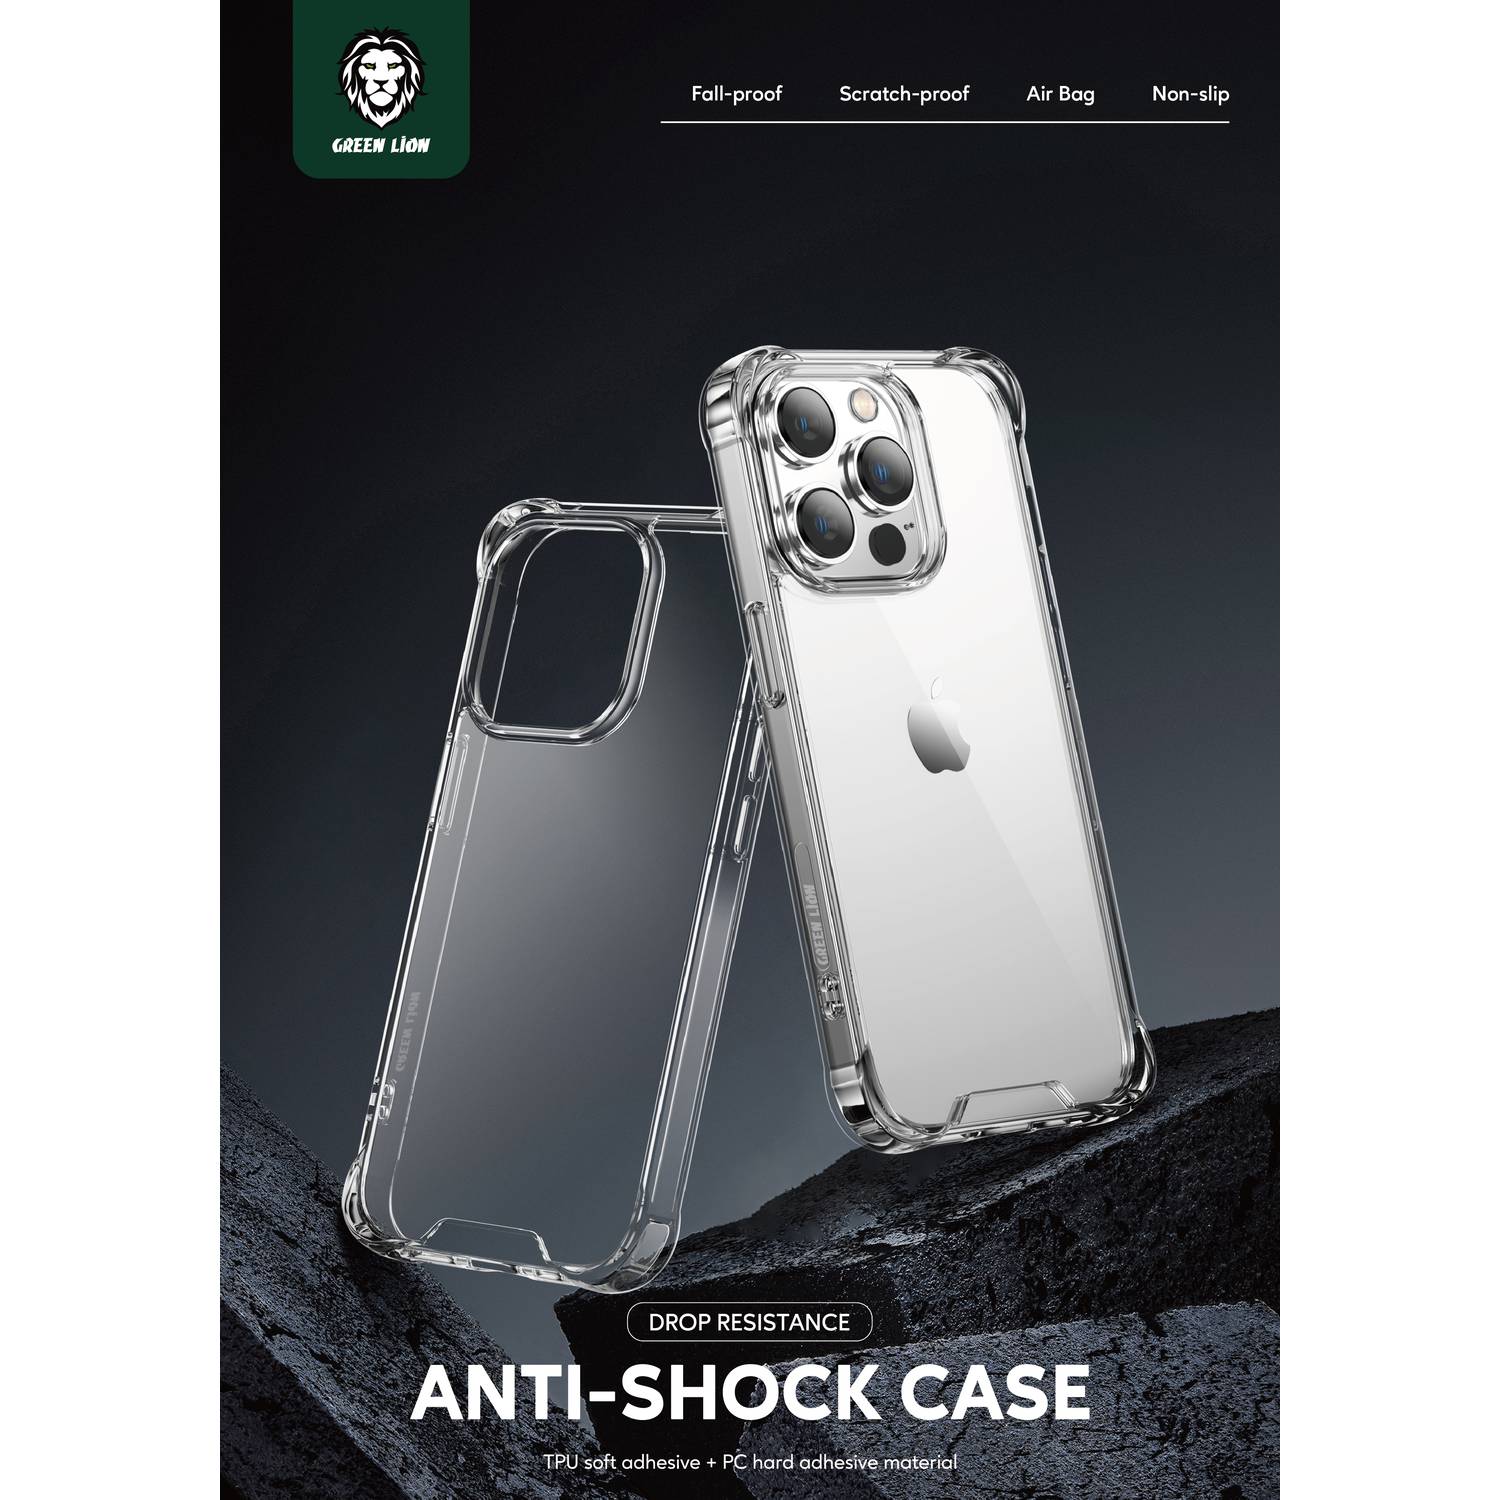 Green Lion Anti-Shock-Proof Case for iPhone 14 Series in sri lanka